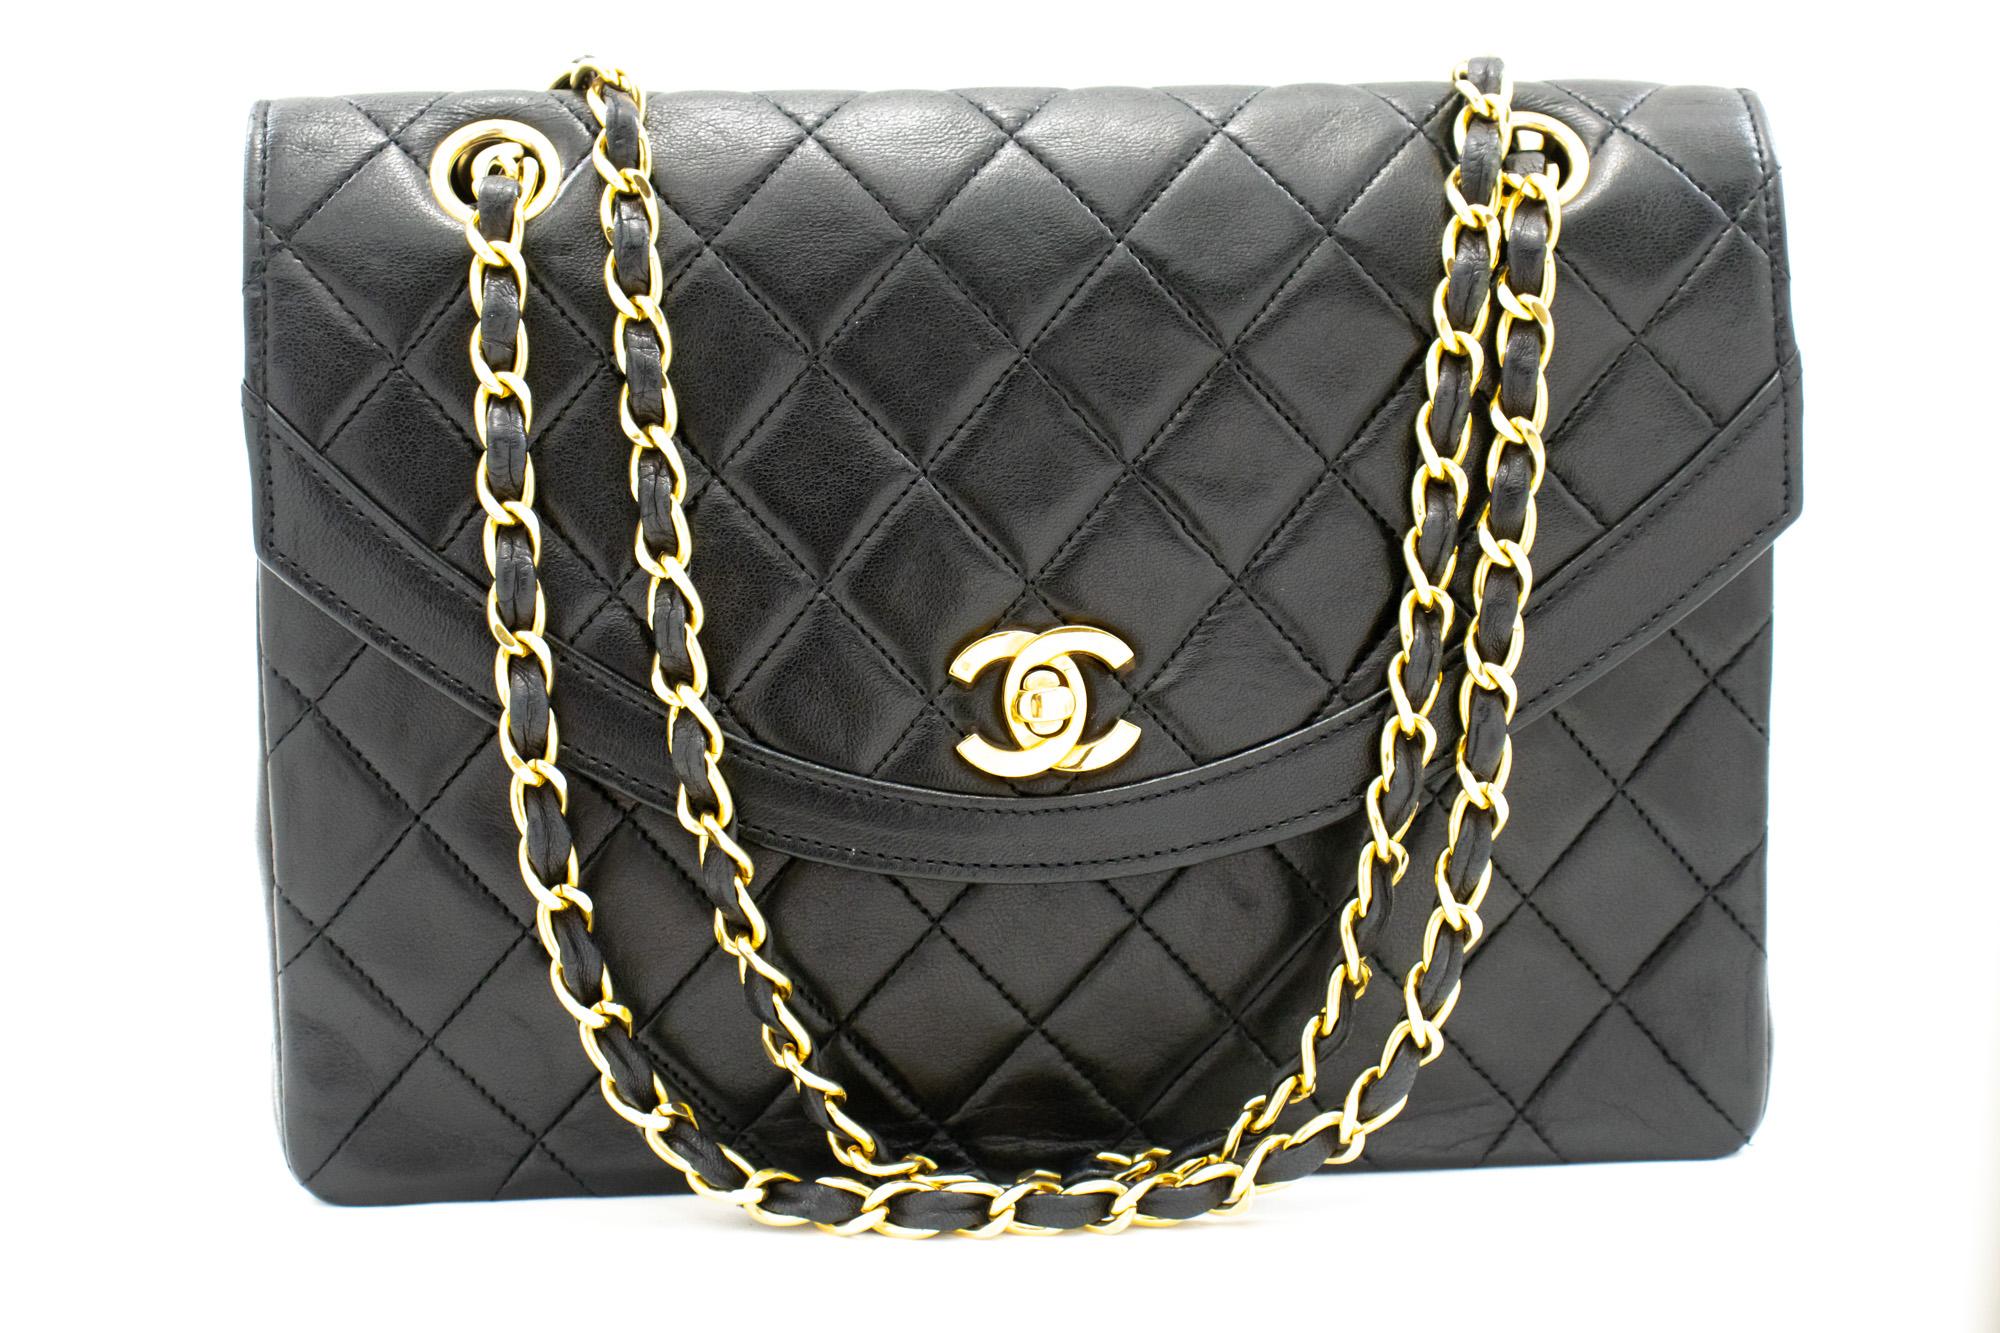 An authentic CHANEL Vintage Half Moon Chain Shoulder Bag Single Flap Quilted. The color is Black. The outside material is Leather. The pattern is Solid. This item is Vintage / Classic. The year of manufacture would be 1986-1988.
Conditions &